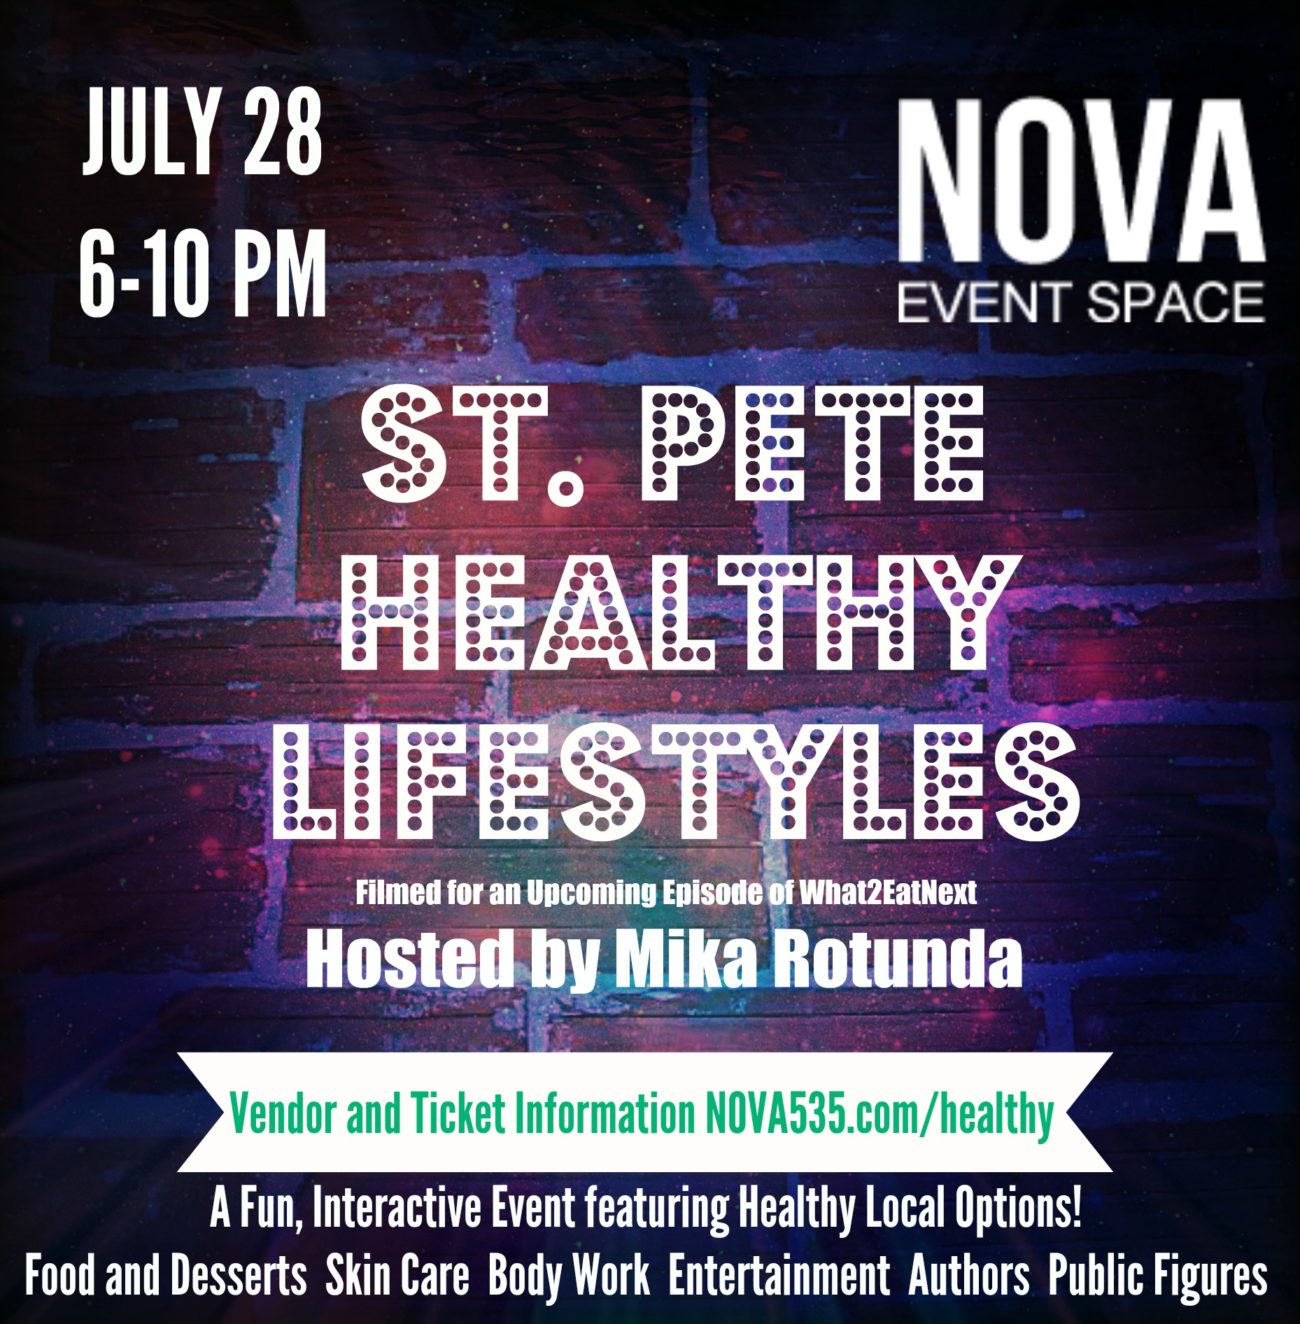 Thursday July 28 2016 at NOVA 535 in DTSP is St. Pete Healthy Lifestyles